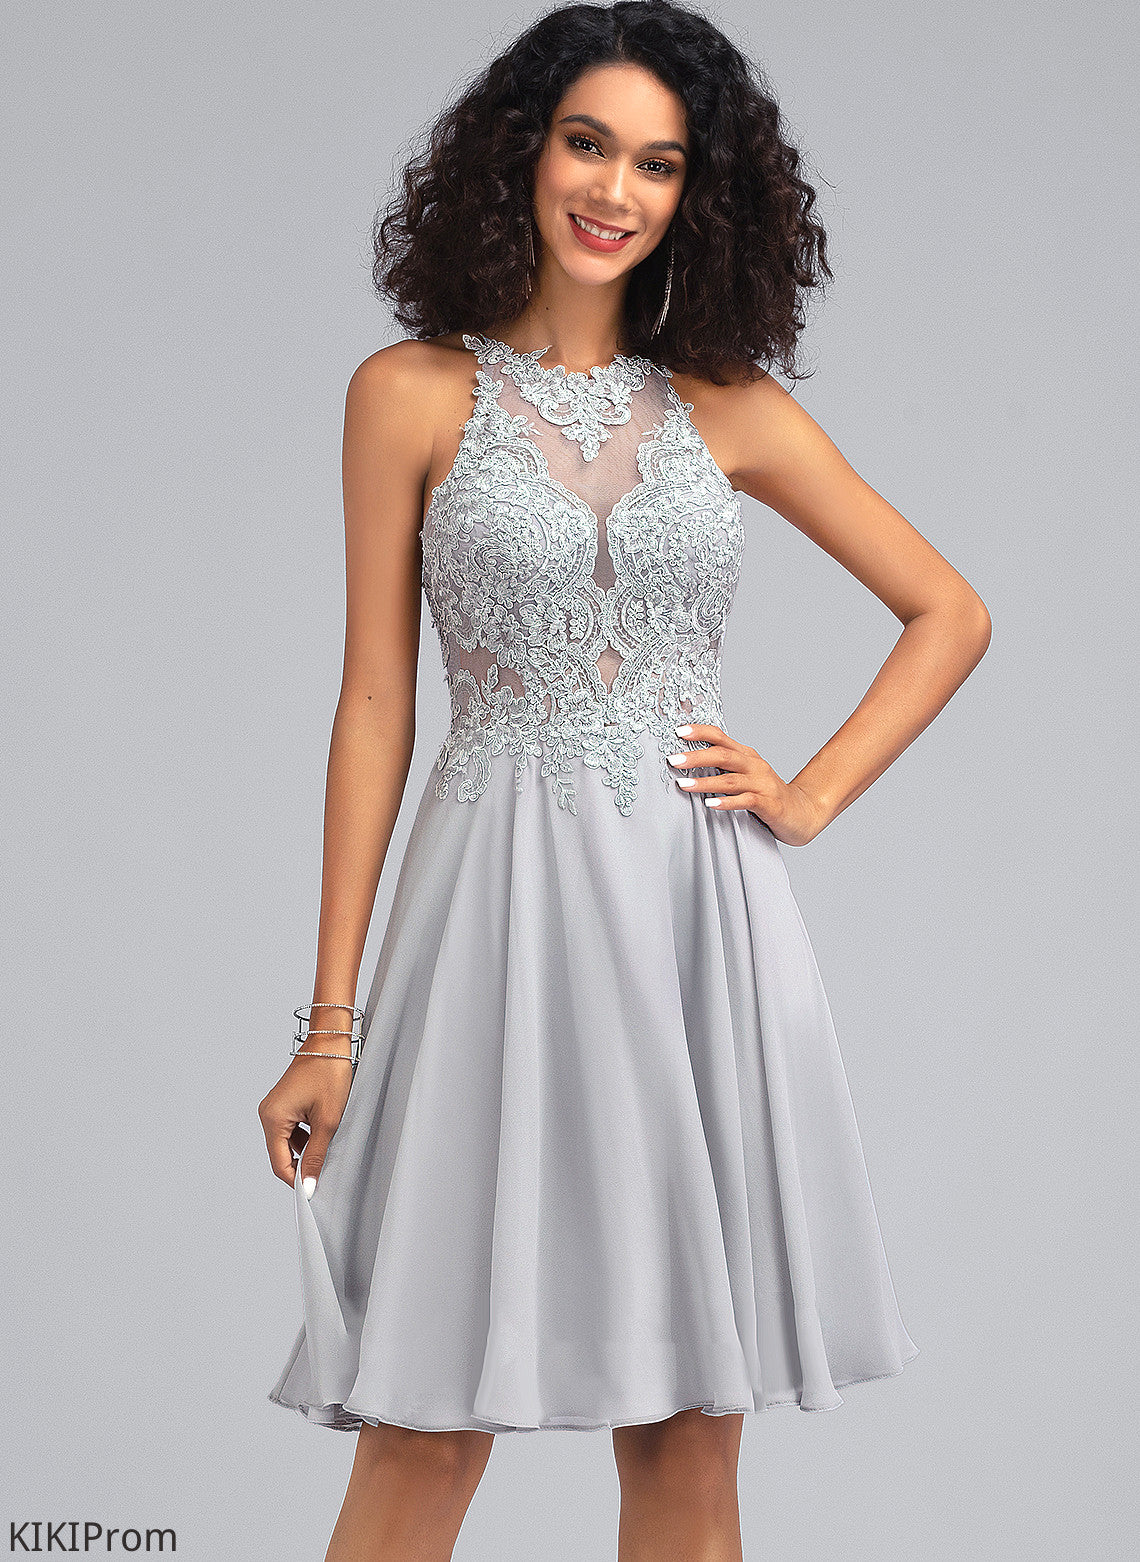 Dress A-Line With Homecoming Homecoming Dresses Kennedi Chiffon Knee-Length Neck Sequins Scoop